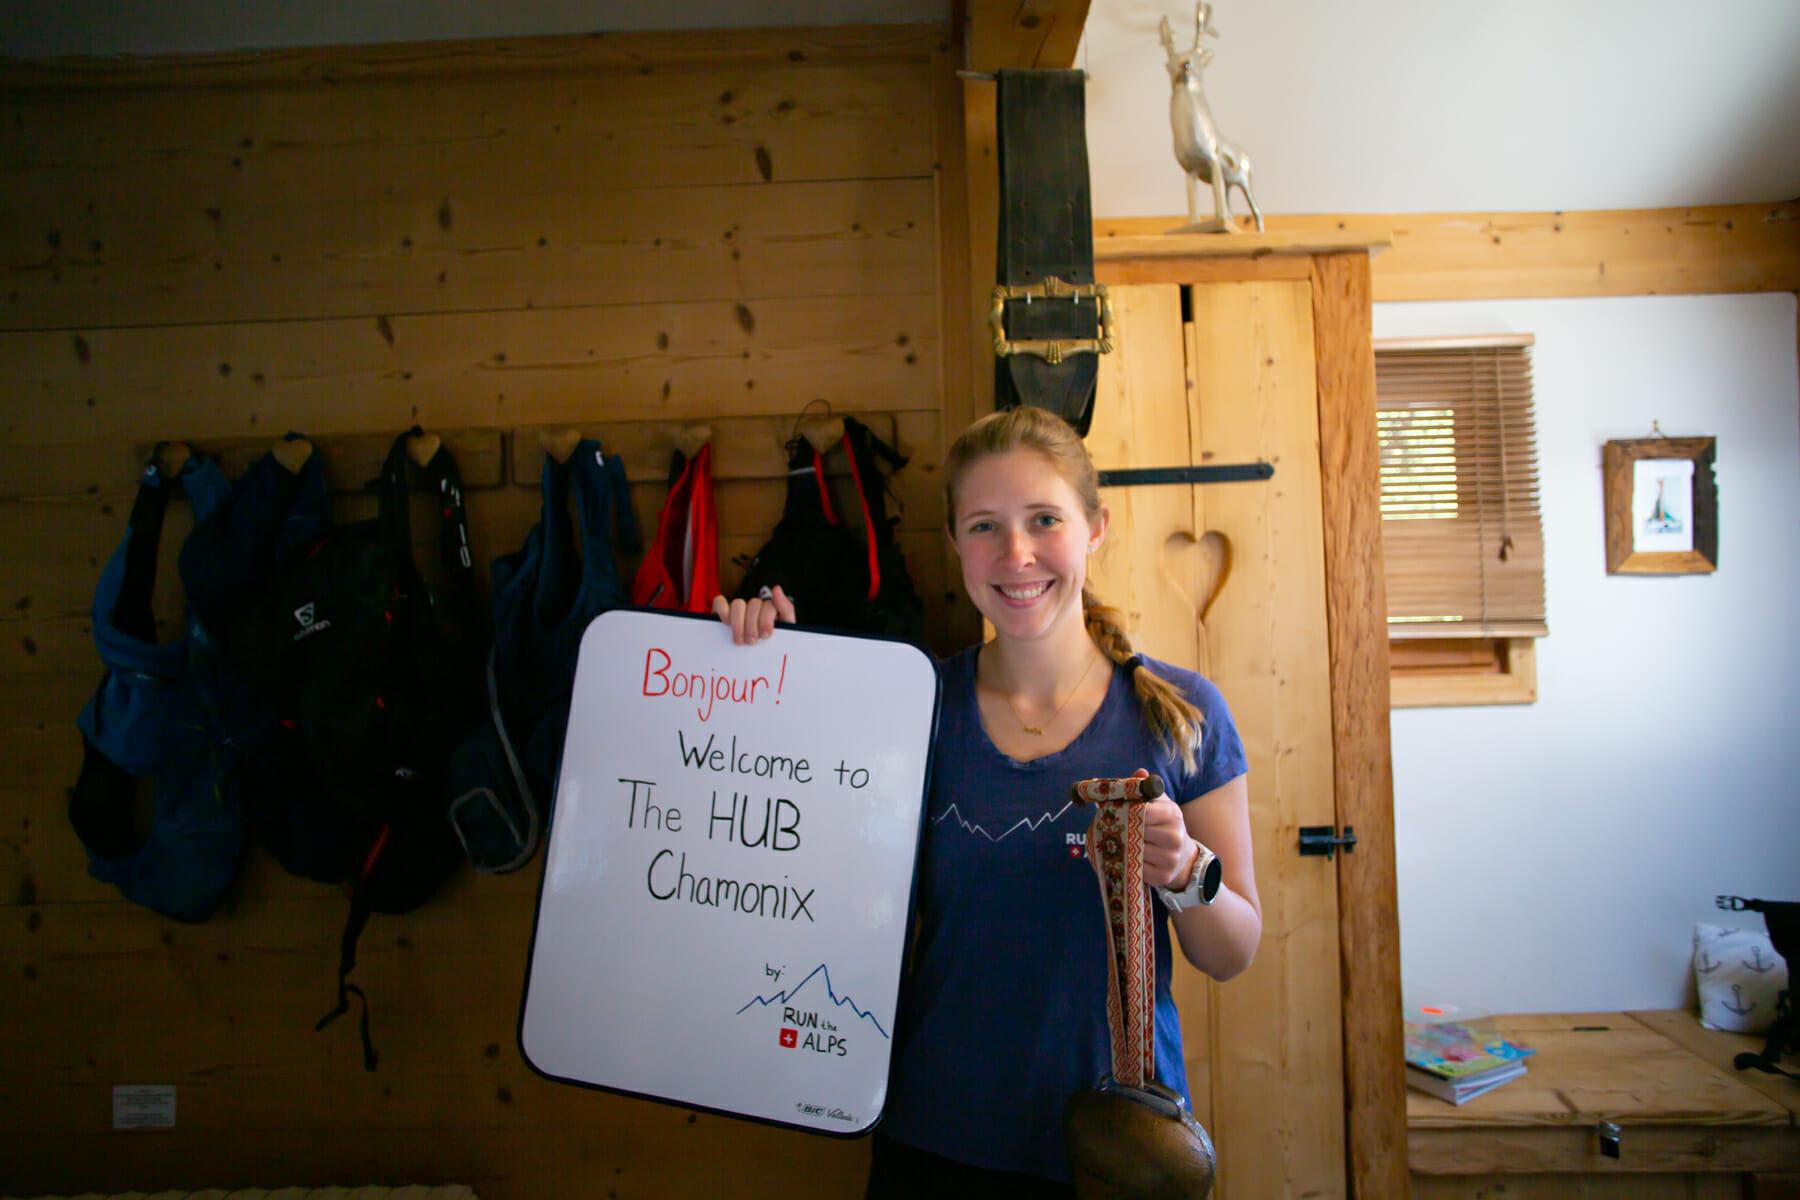 Blond female with handwritten "Bonjour! Welcome to the HUB Chamonix" sign and cow bell